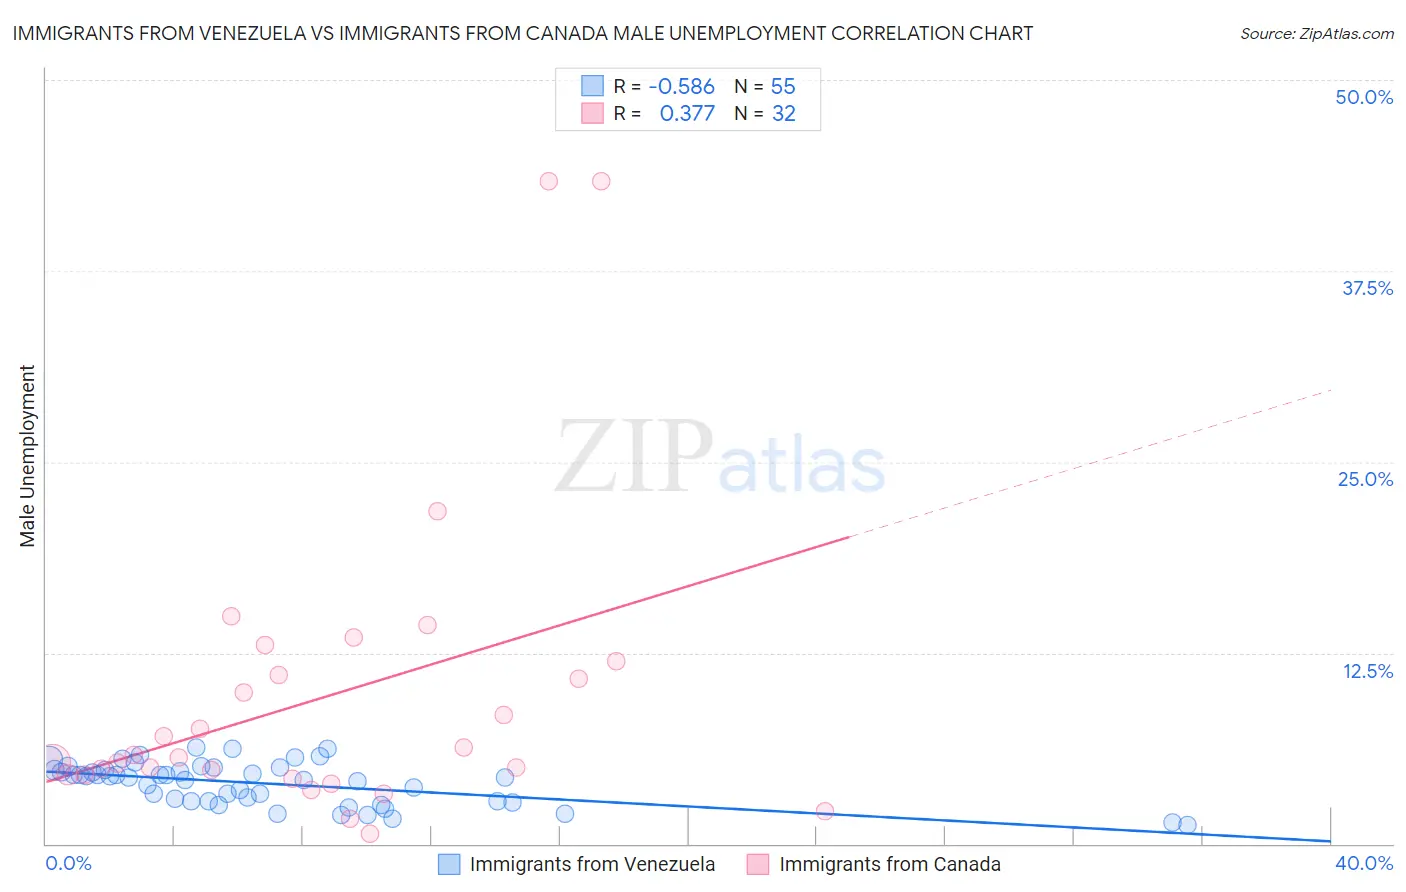 Immigrants from Venezuela vs Immigrants from Canada Male Unemployment